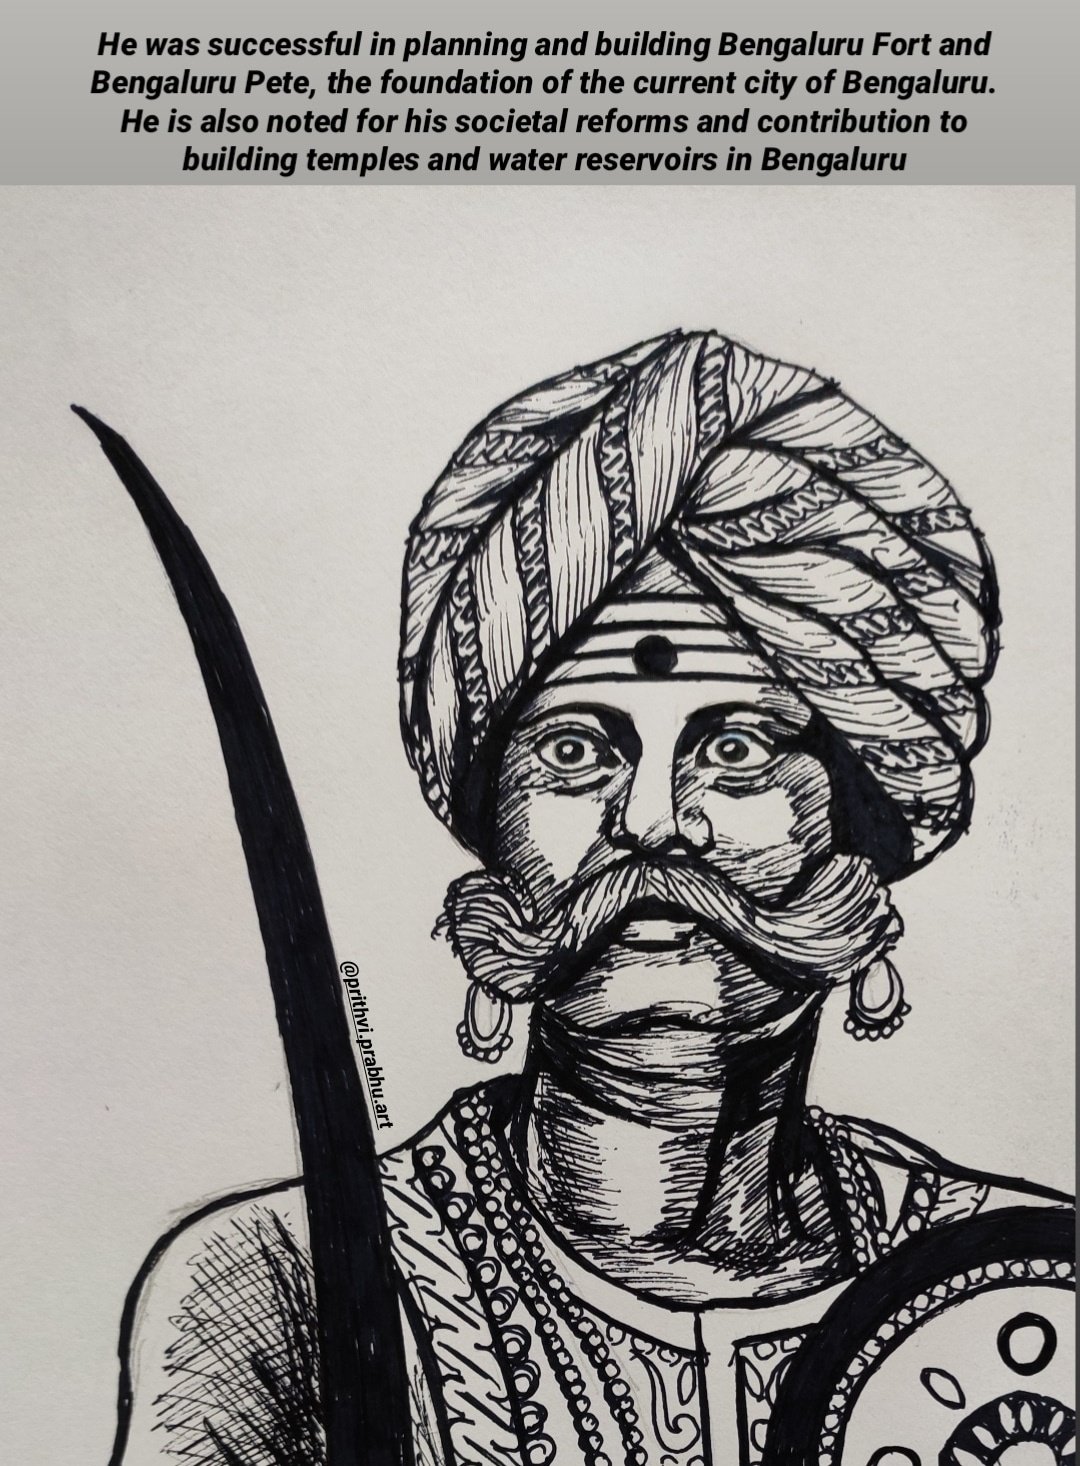 Kempegowda of Bengaluru and the BJP's wooing of Vokkaligas